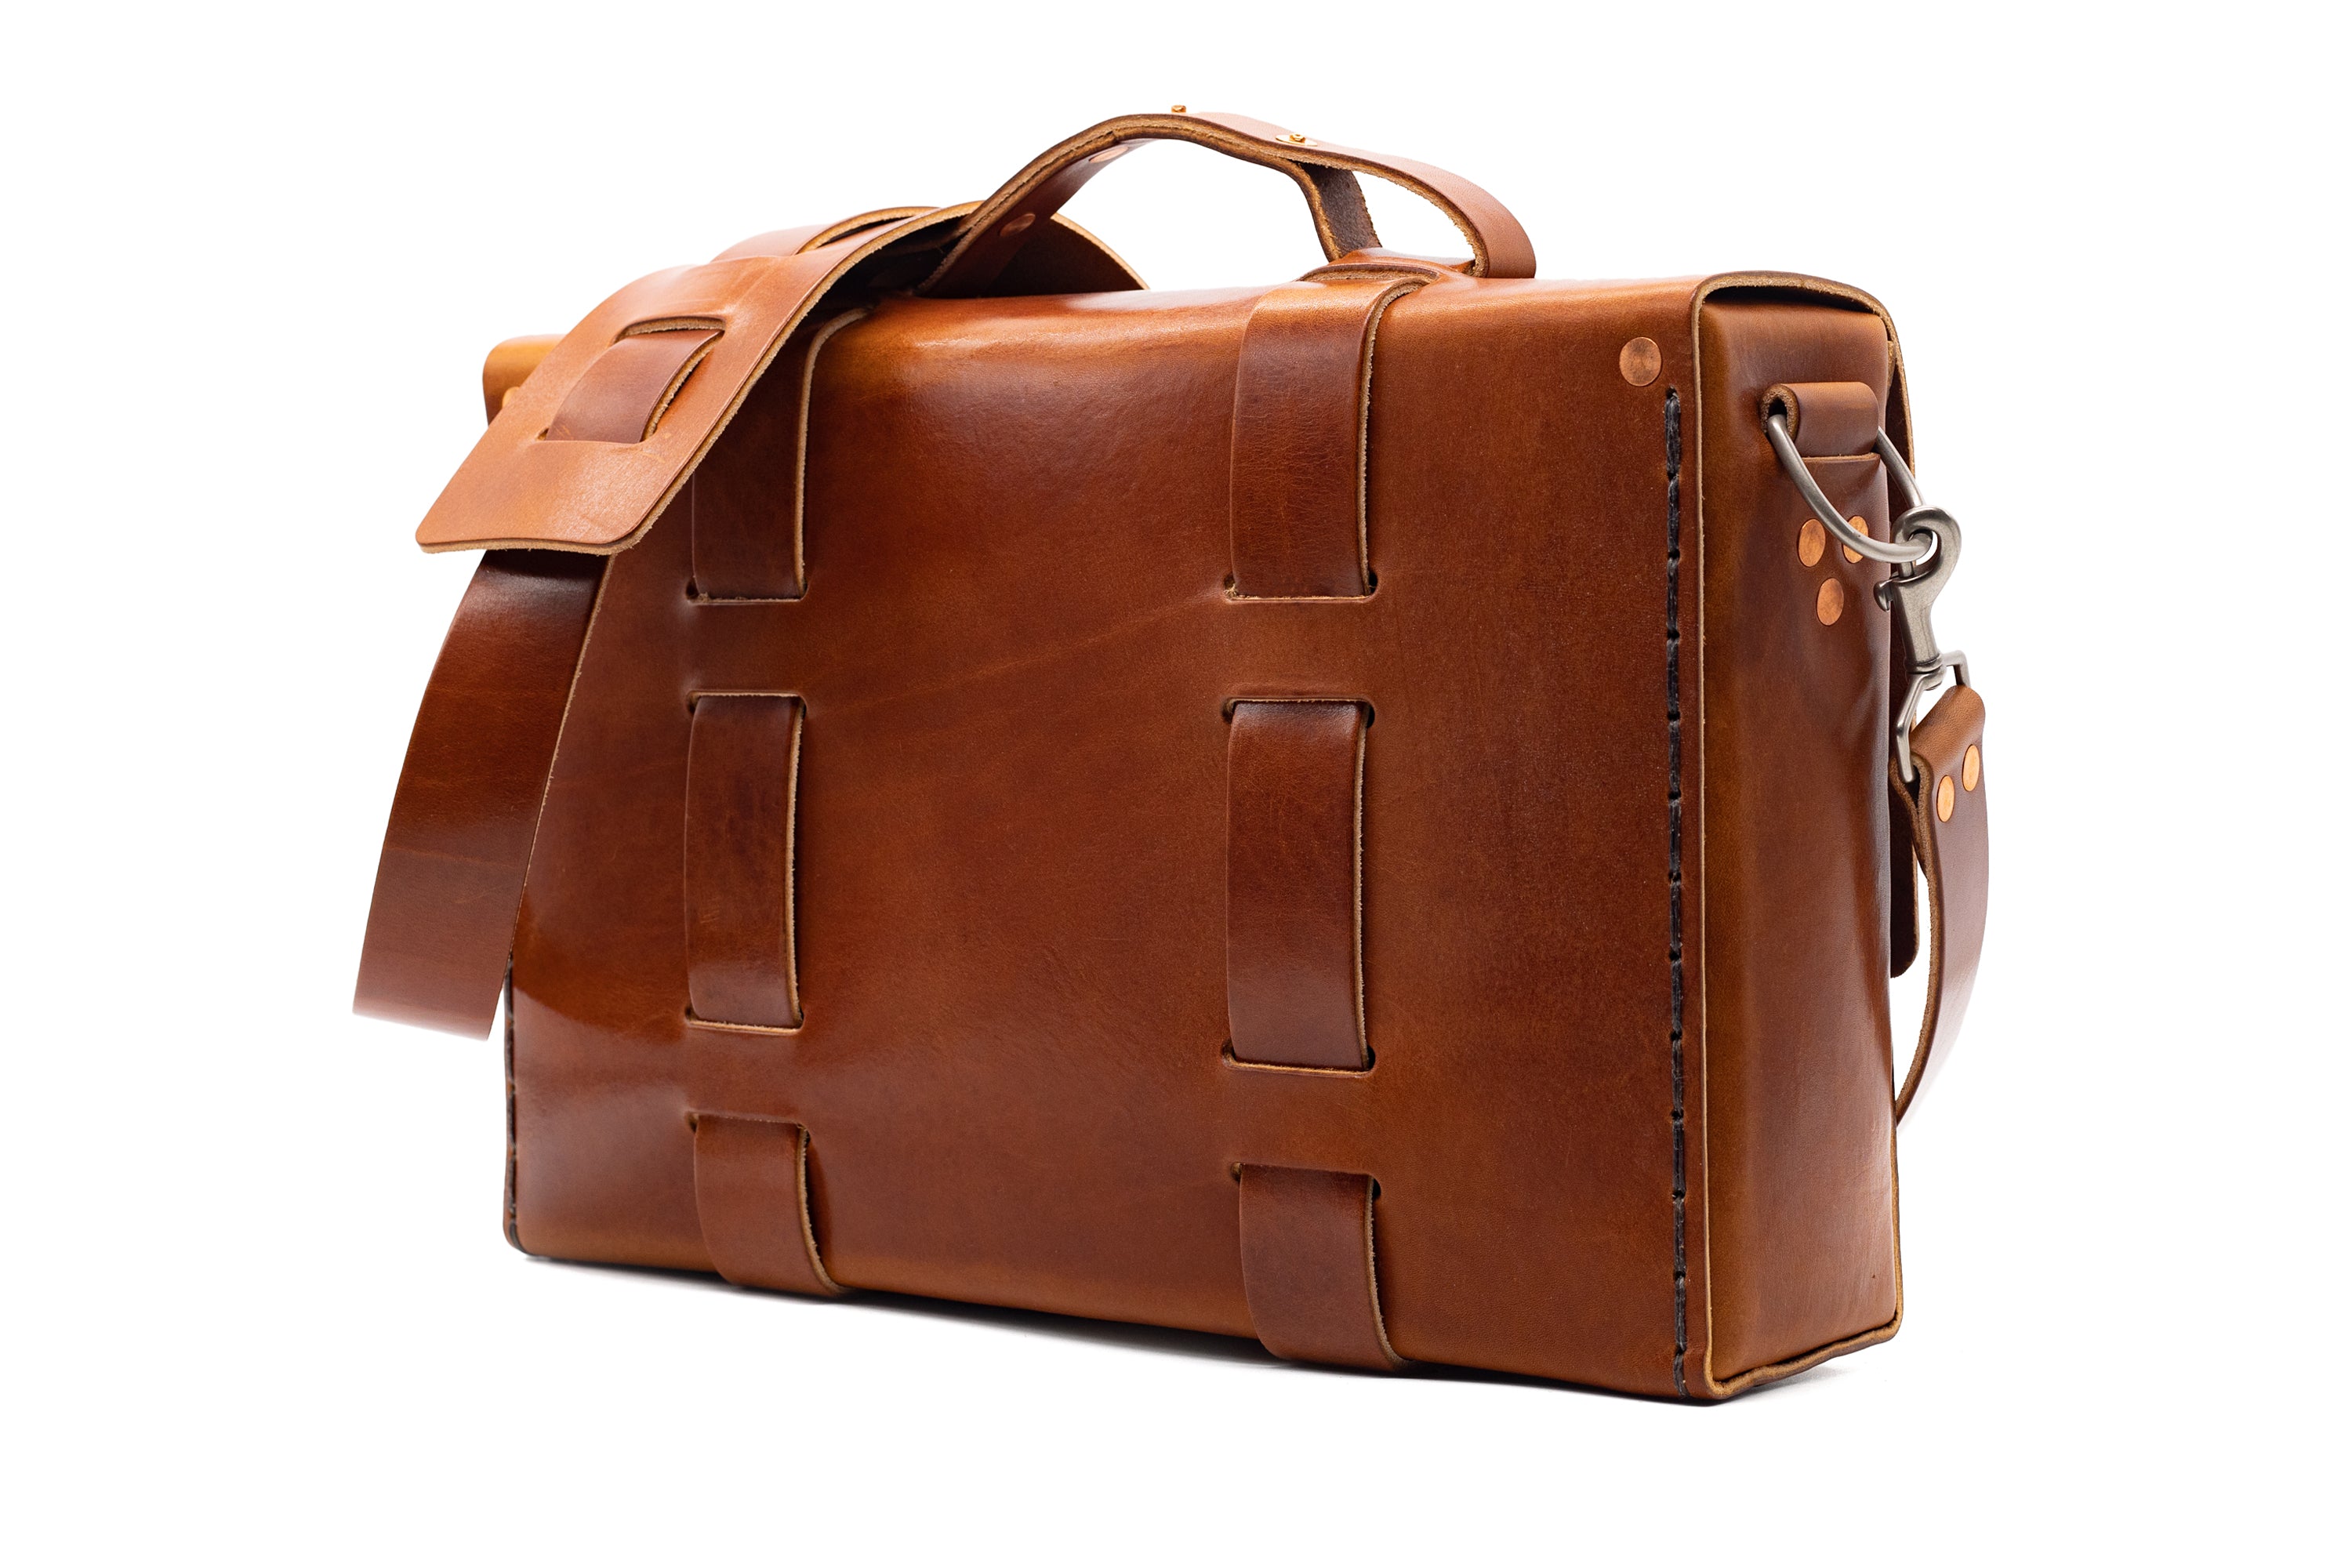 LIMITED EDITION NO. 4313 MINIMALIST STANDARD LEATHER SATCHEL IN AMBER BROWN - ONLY 1 MADE